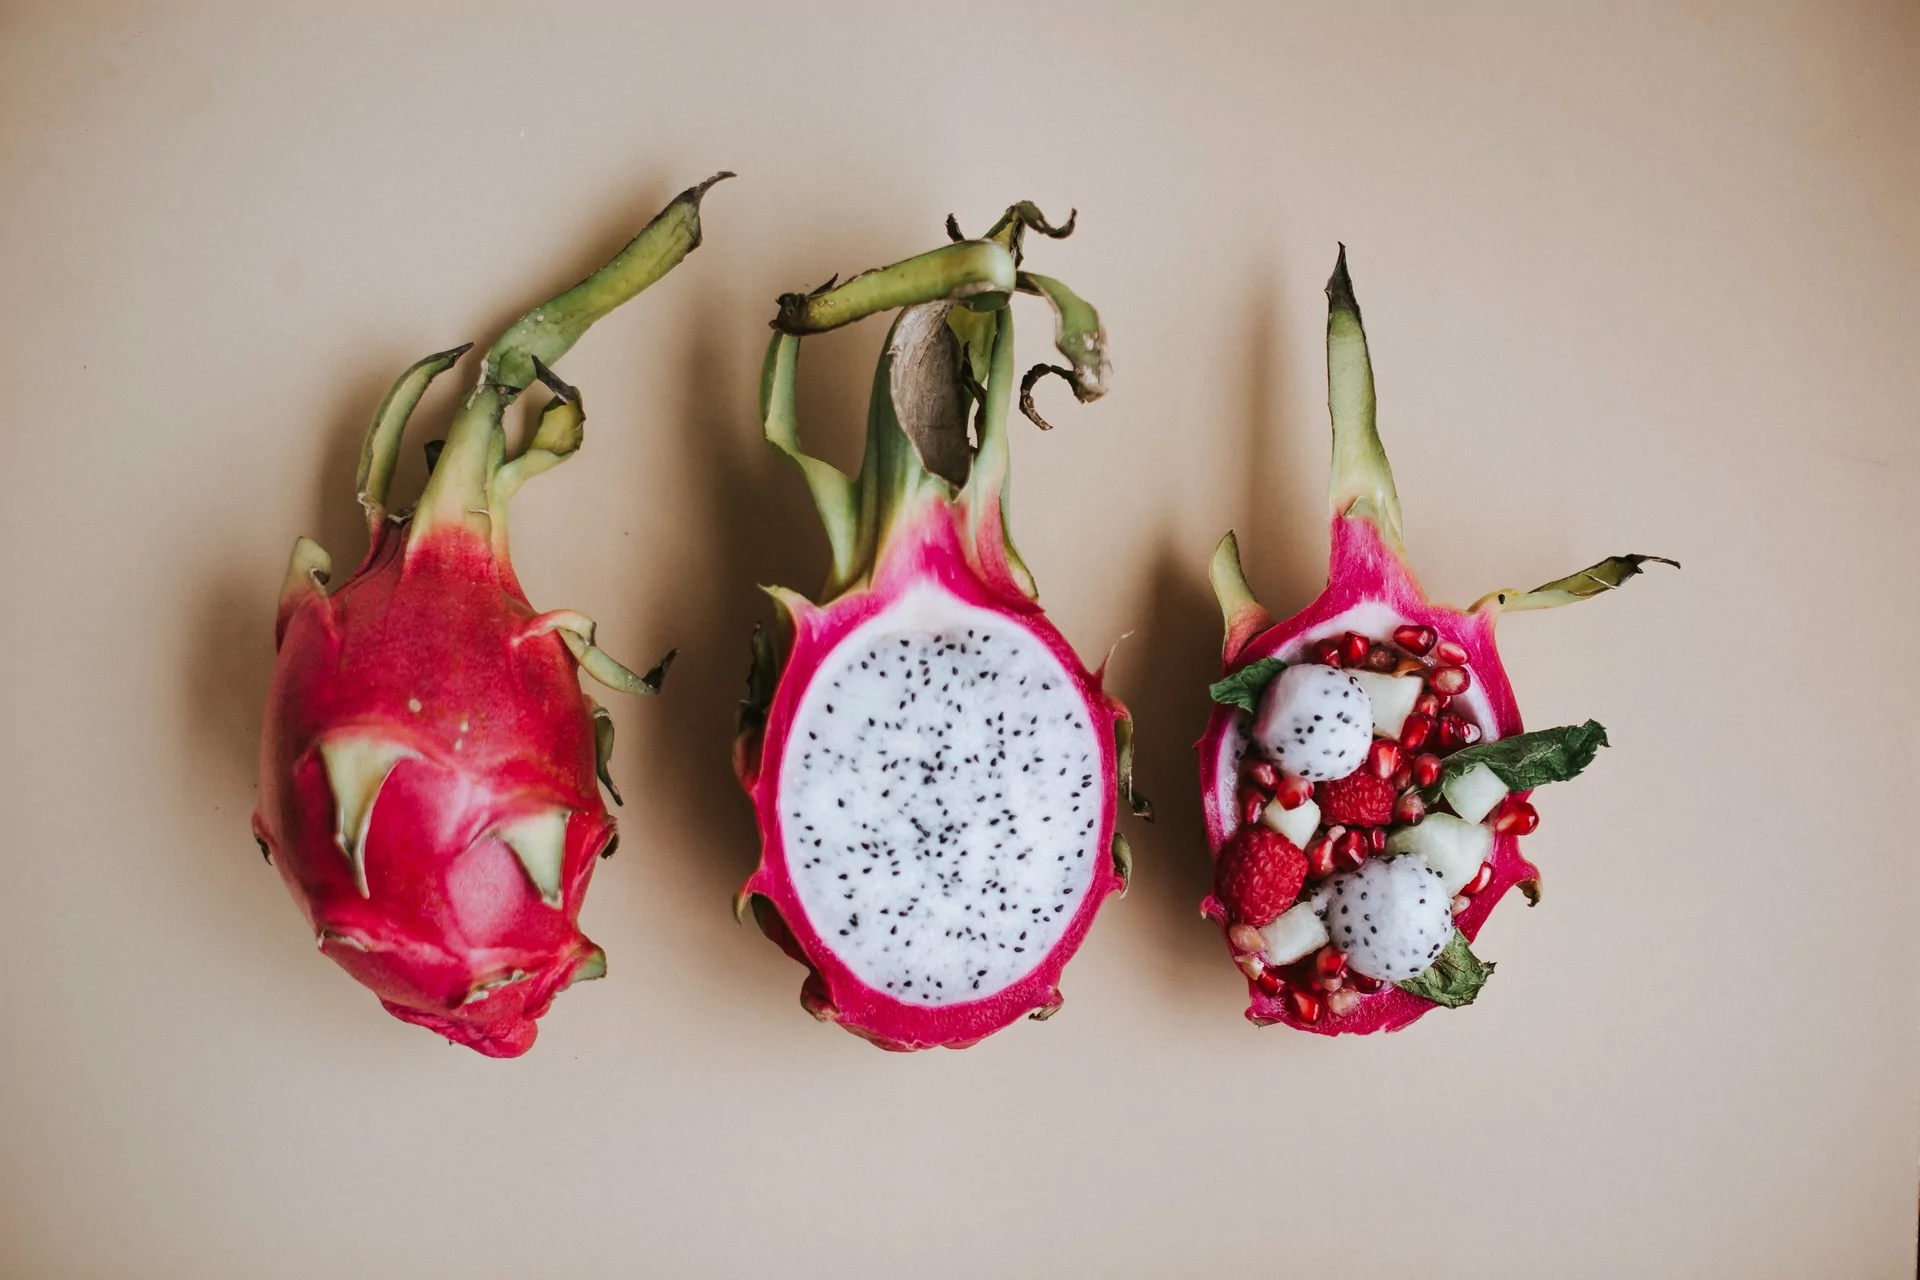 Dragon Fruit Can Increase Iron Levels